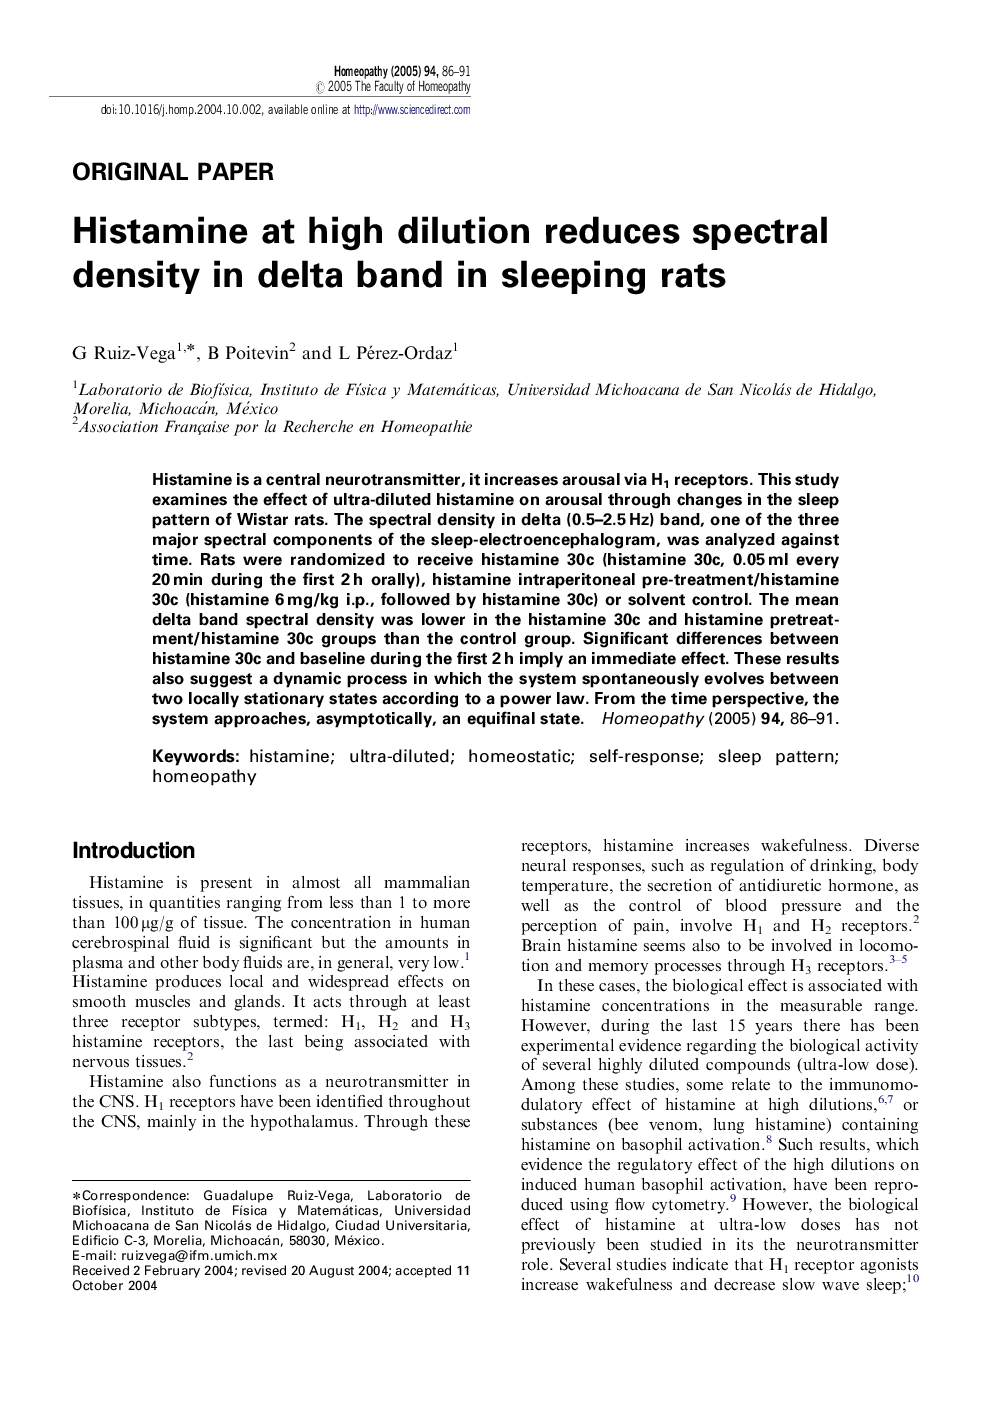 Histamine at high dilution reduces spectral density in delta band in sleeping rats